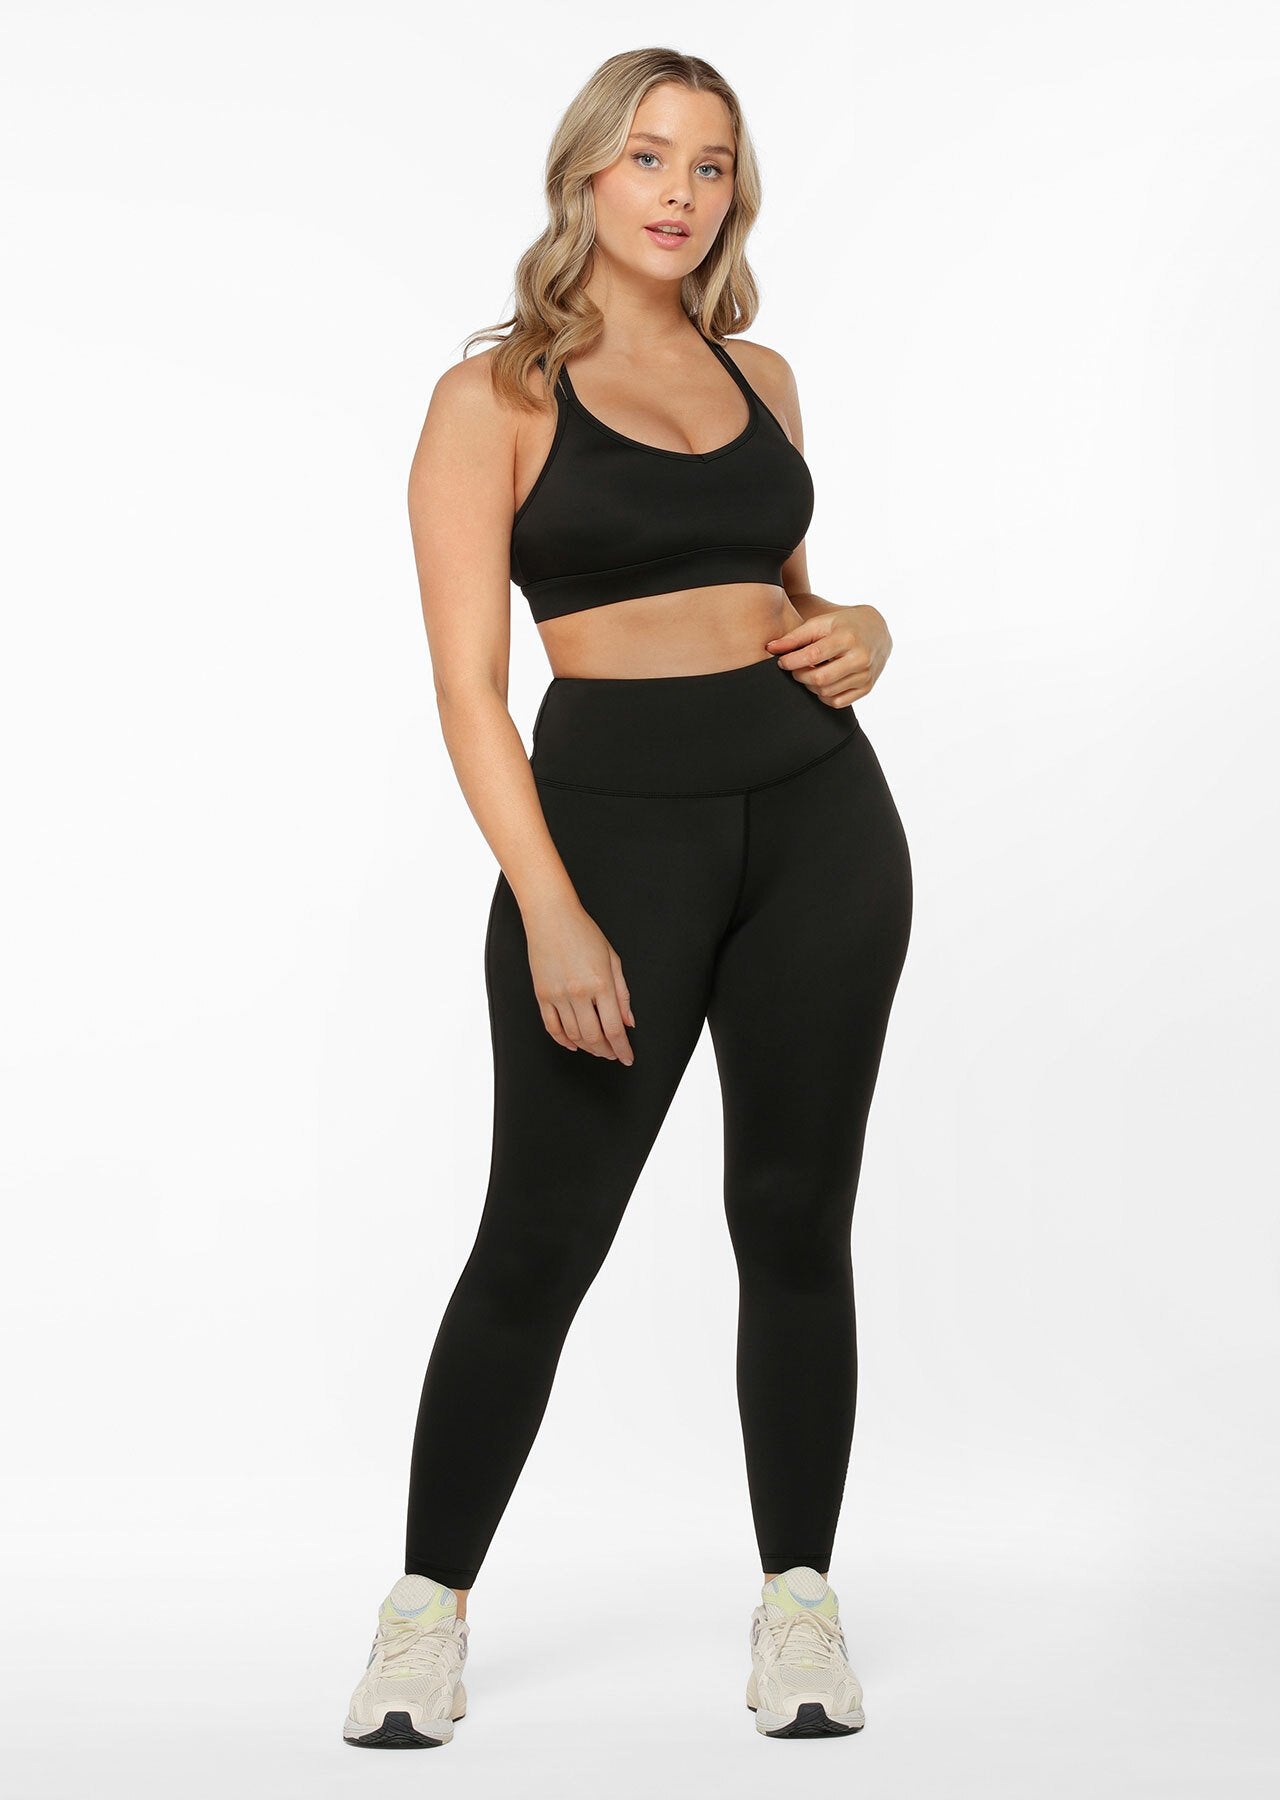 Lotus No Chafe Cool Touch Ankle Biter Leggings - Black Shop at GOALS -